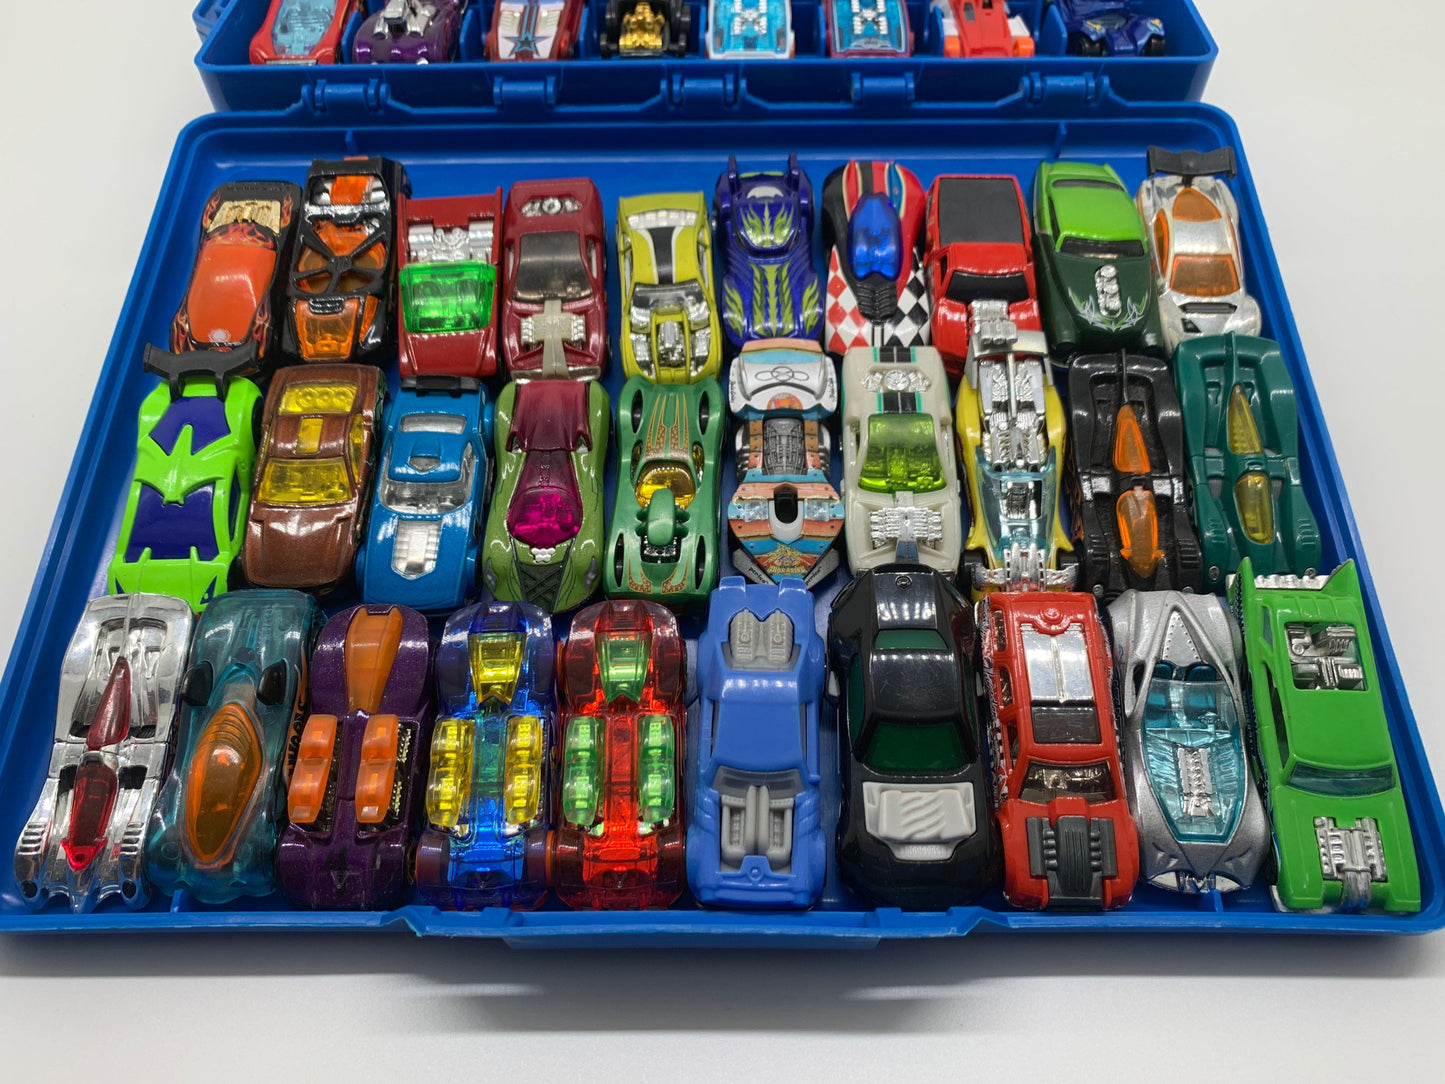 Hot Wheels Fantasy Cars Collection Perfect Birthday Gift Miniature Collectible Scale Model Toy Car Lot Tara Carry Case Die Cast Storage